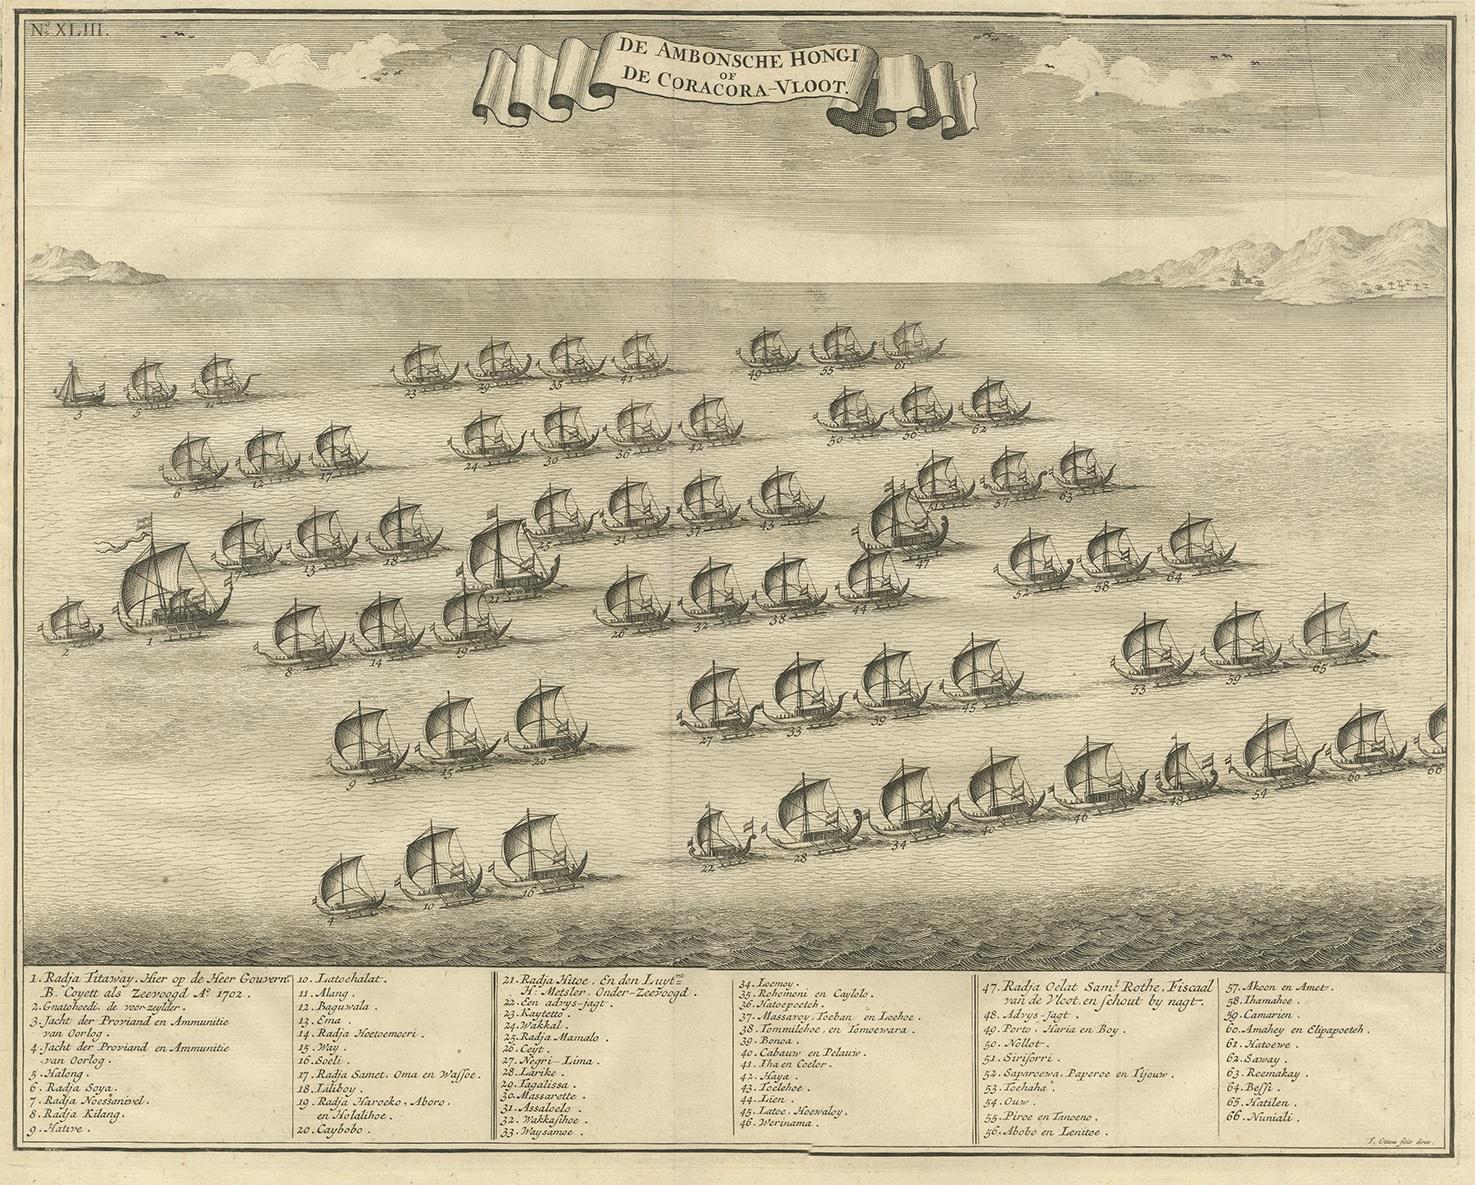 Antique print titled 'De Ambonsche Hongi of de Coracora-Vloot'. The Hongi or Coracora fleet from Ambon (Amboine), Indonesia. Below the image there is a numbered key (1-66) with the names of the ships. This print originates from 'Oud en Nieuw